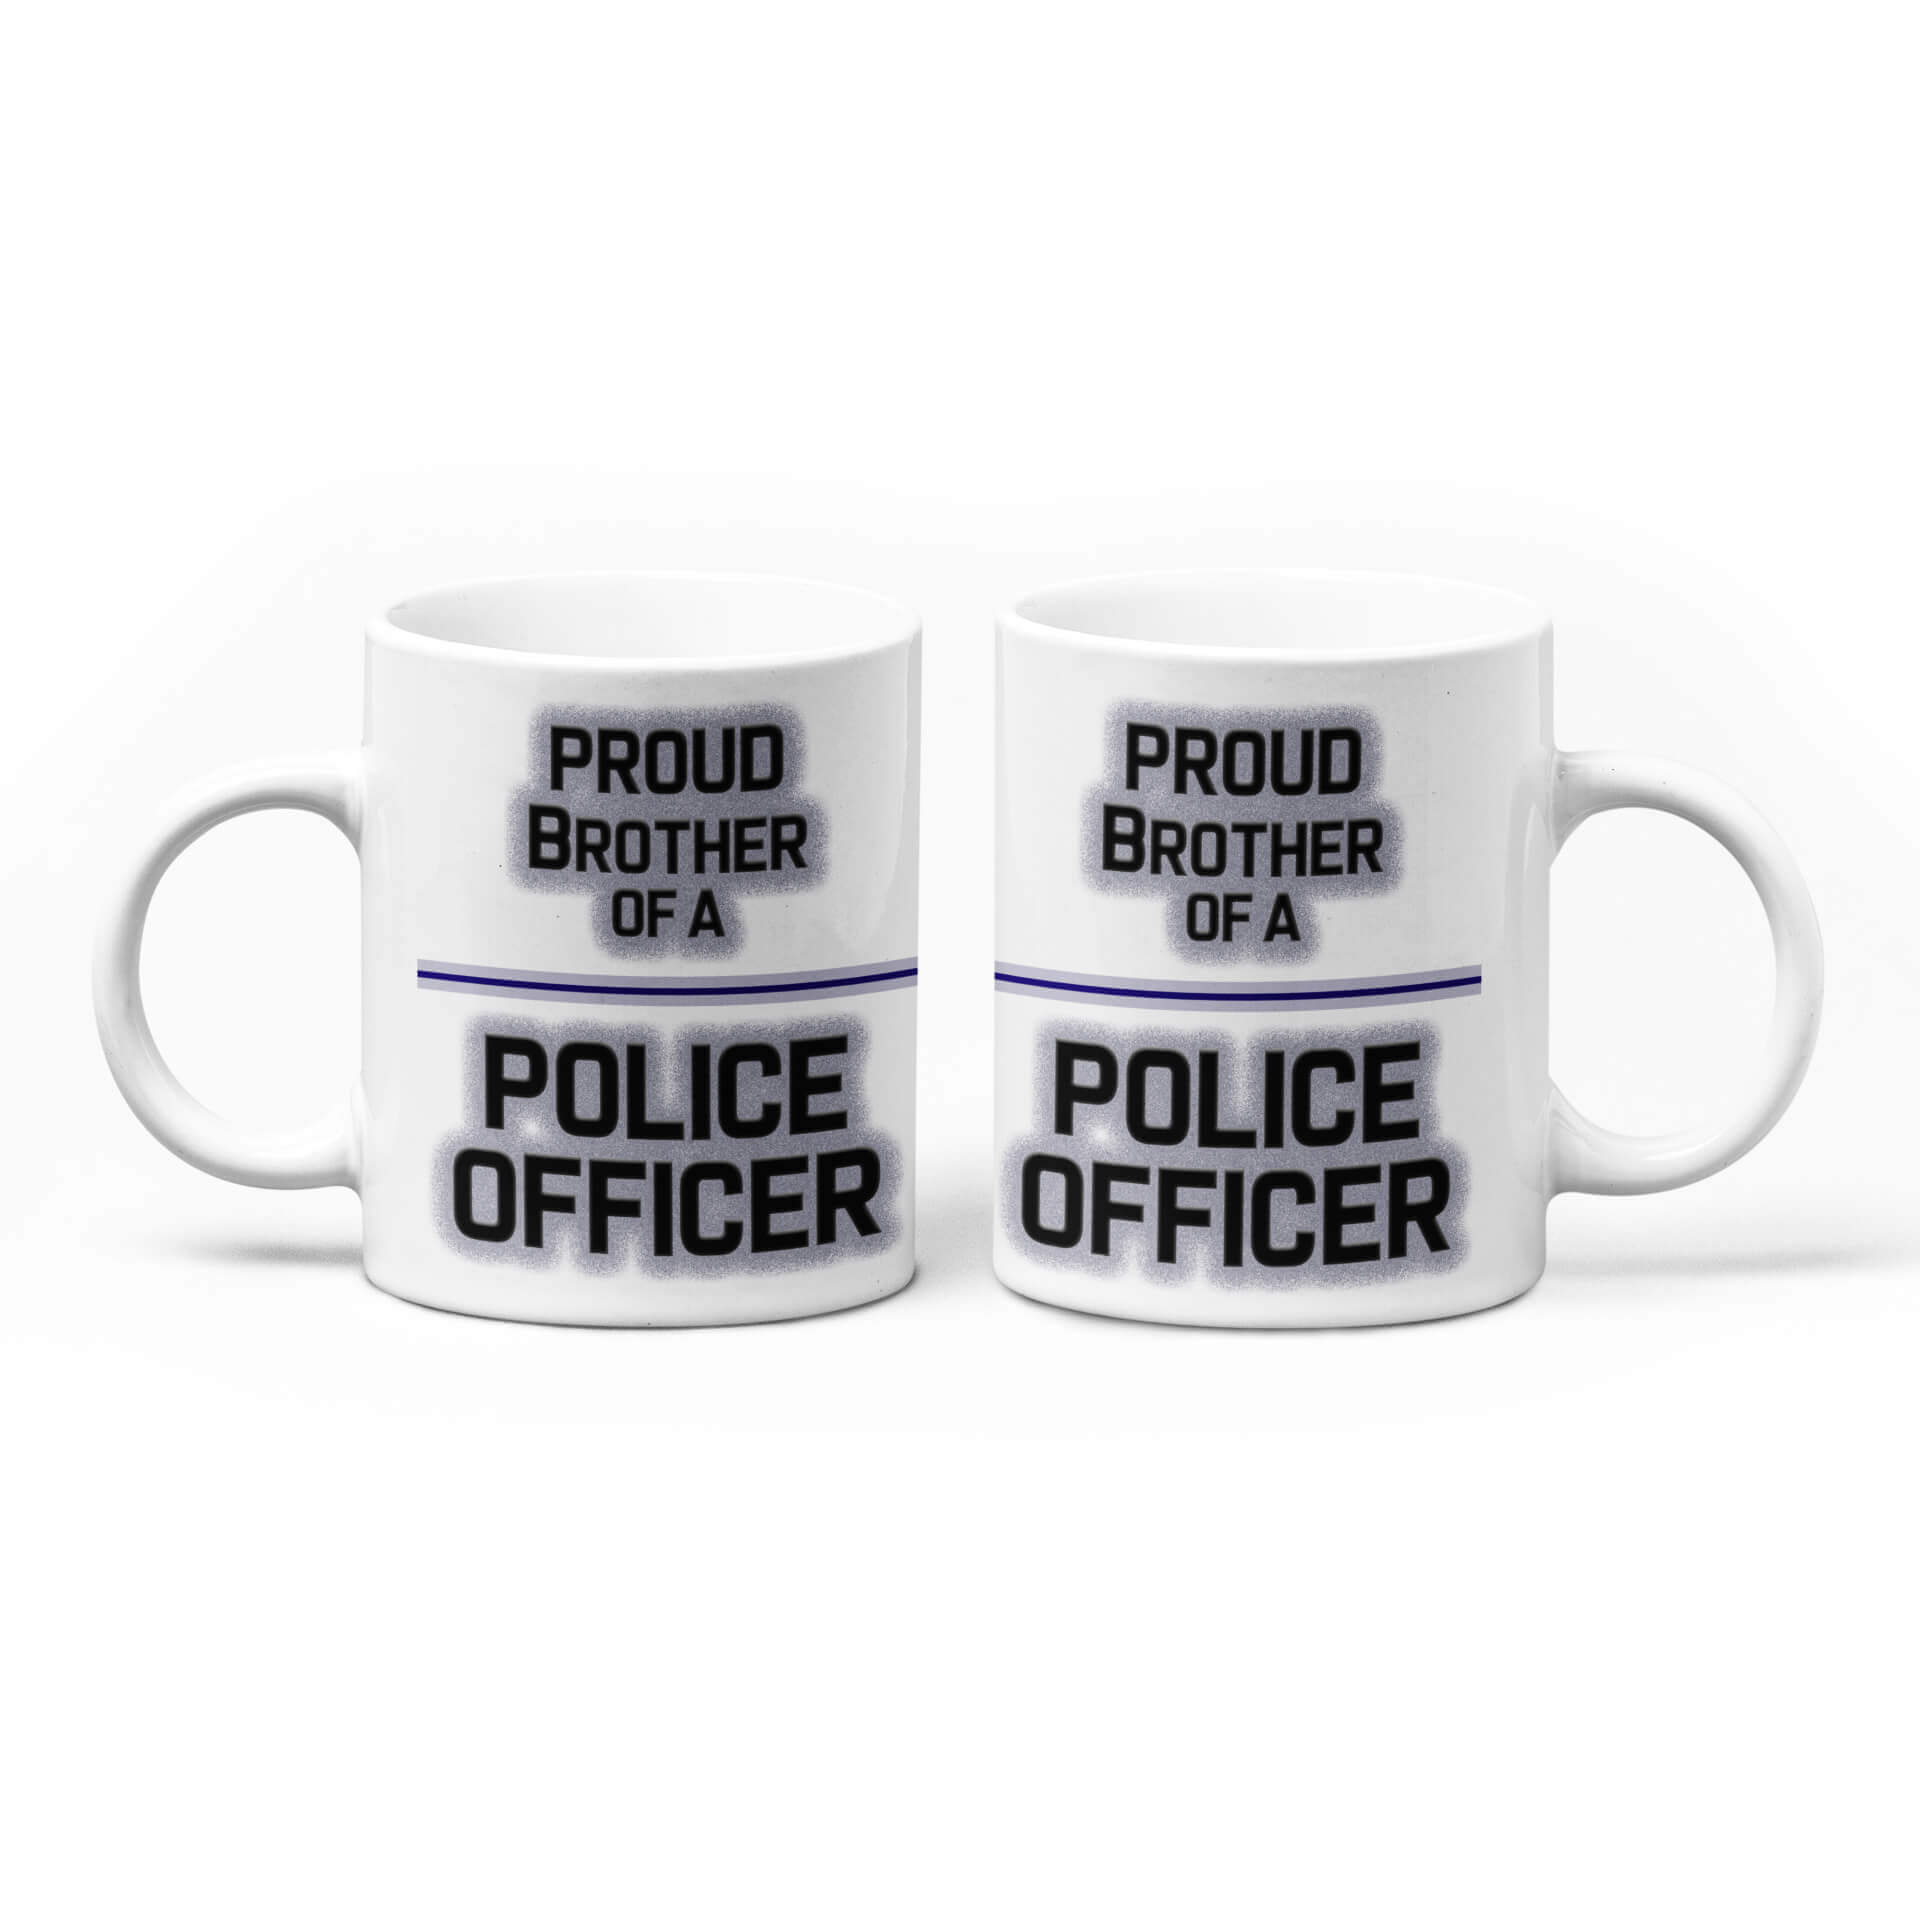 Proud Brother of a Police Officer Mug